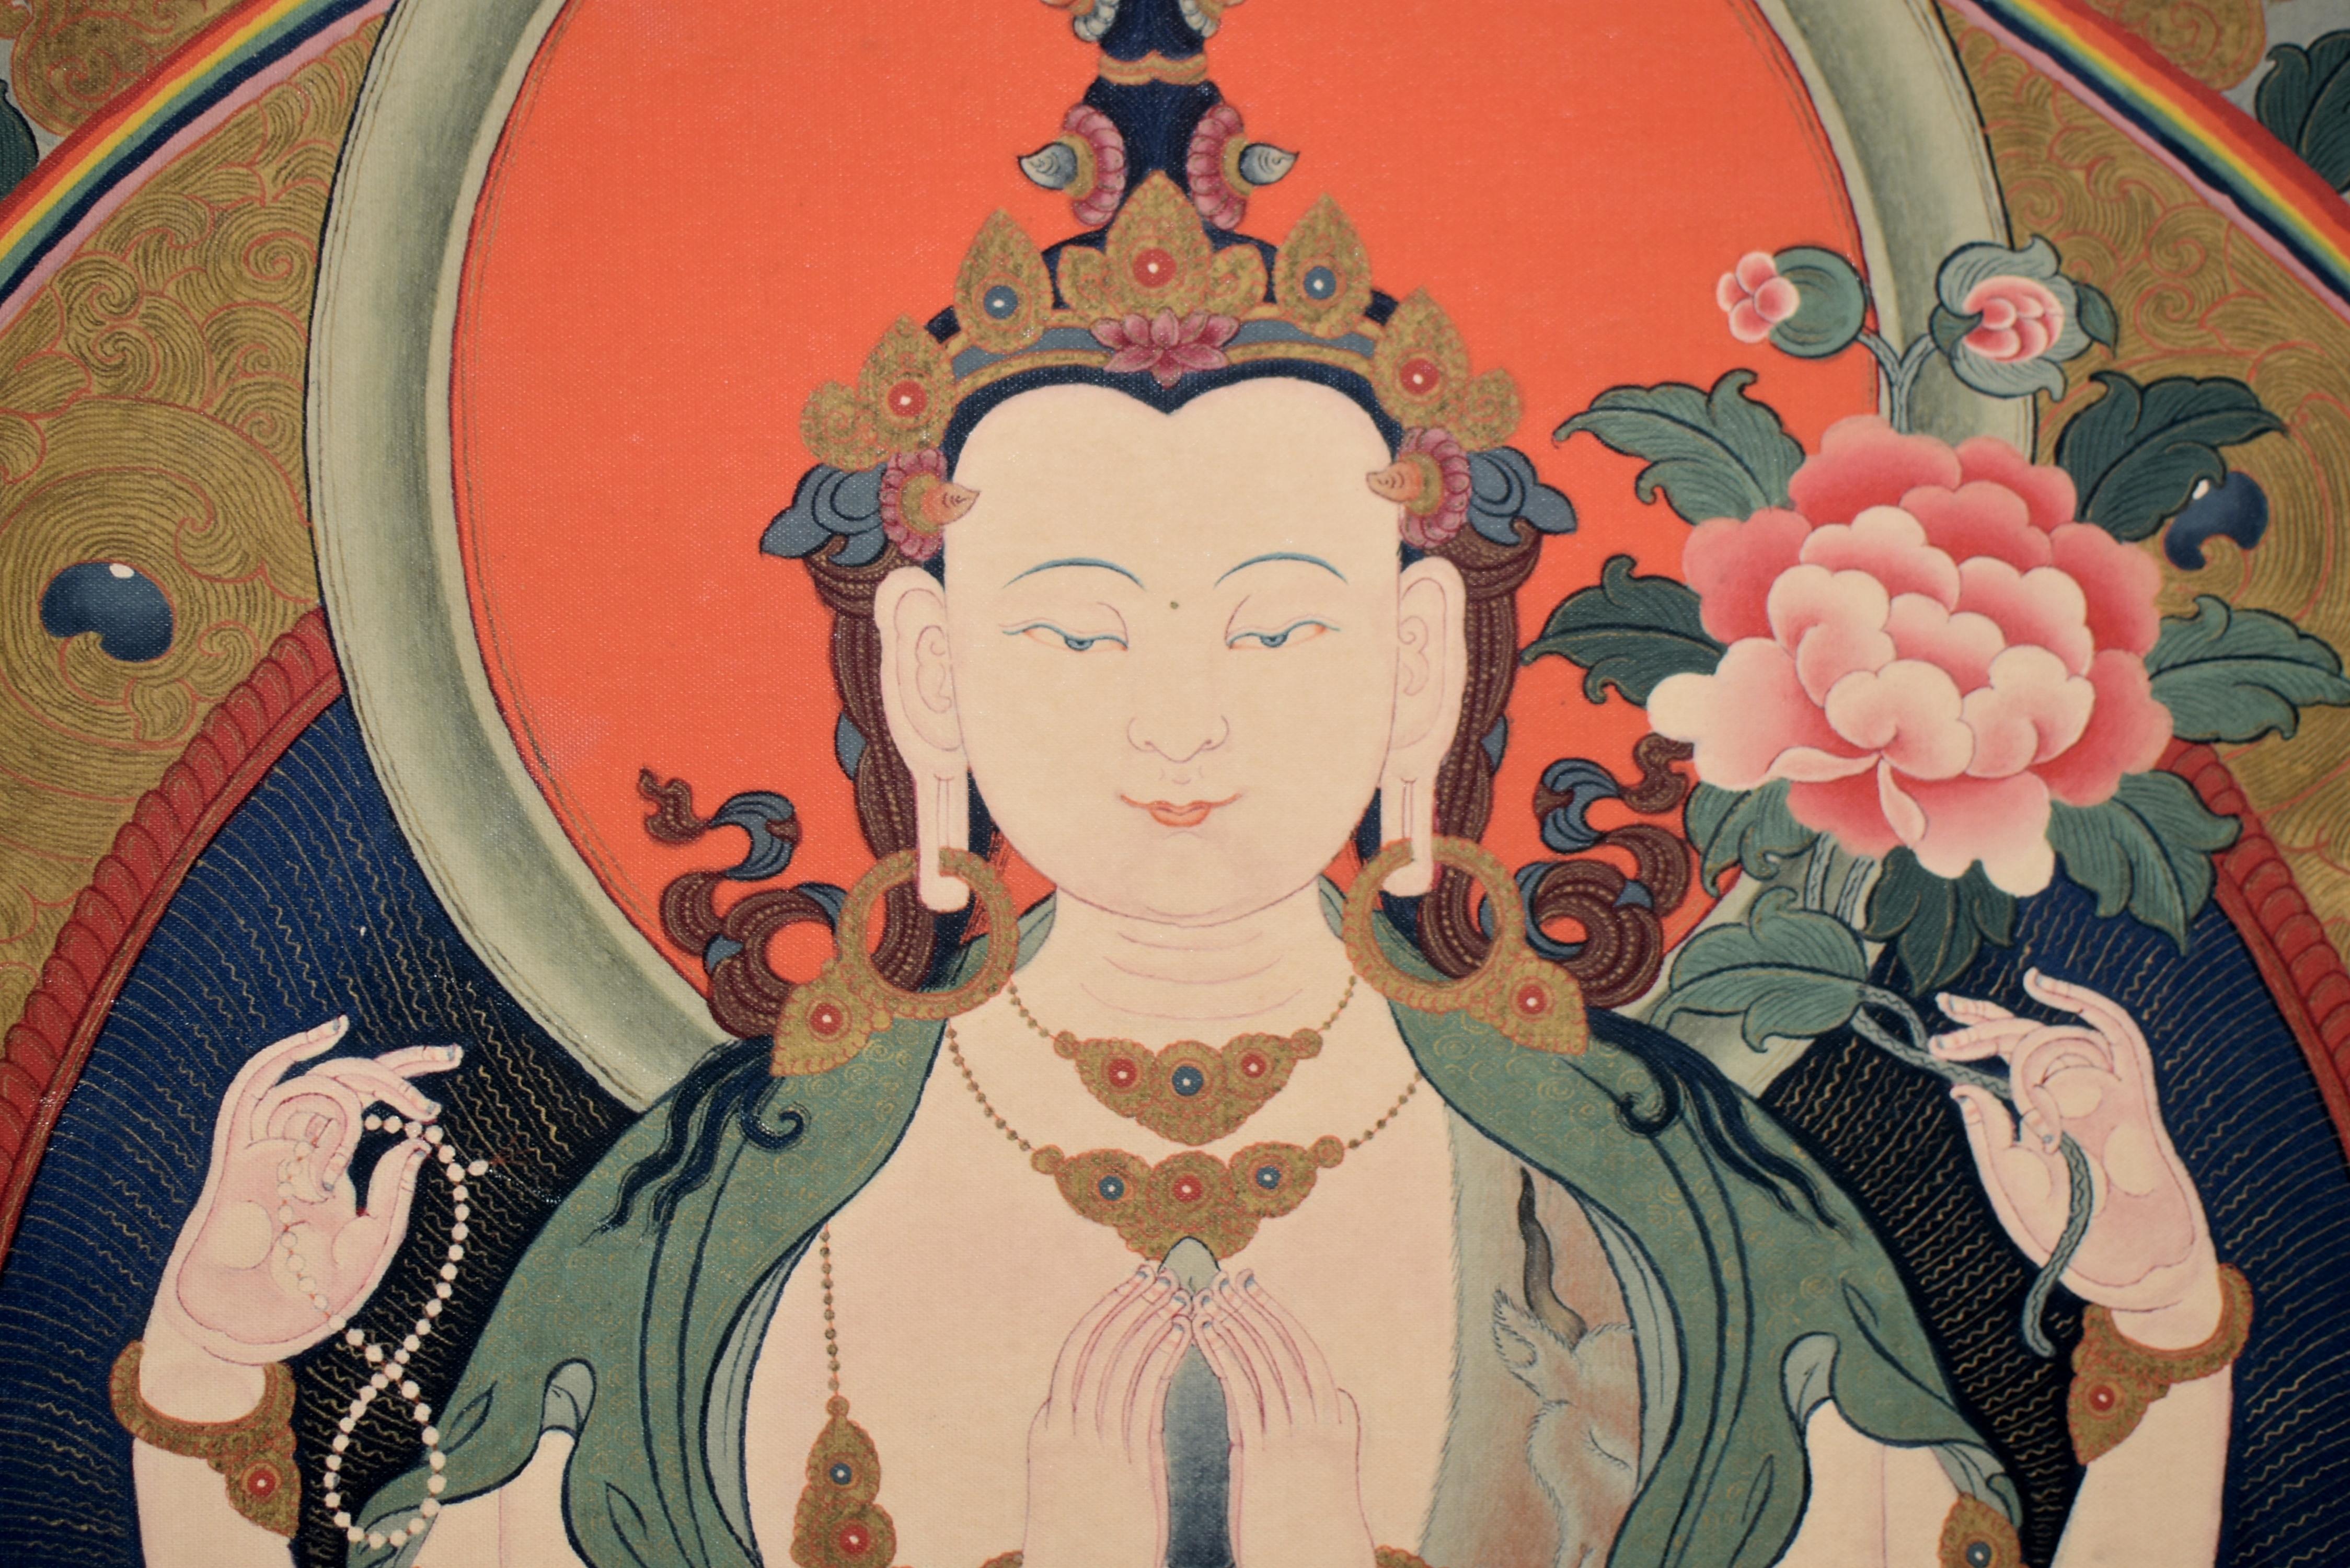 An one of a kind Thangka print depicting the mighty Tibetan White Tara, Goddess of Great Compassion. Seated dhyana asana on lotus throne, rising above prussian blue water with a fortune wheel and blooming lotuses, the full face with large downcast